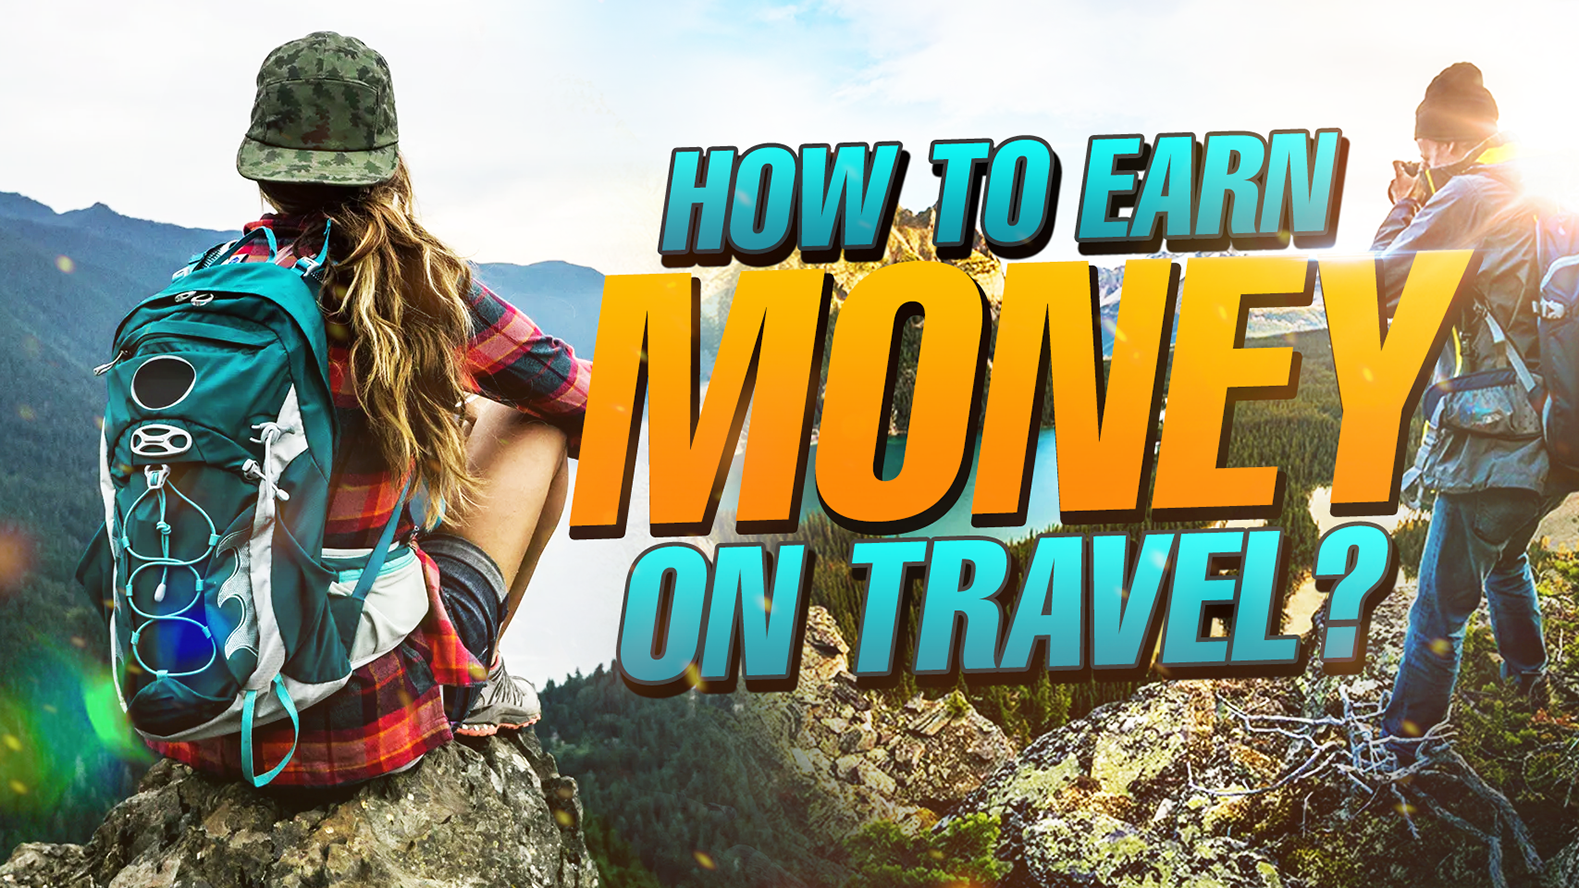 How to earn money on travel? 19 Tips to become a Digital Nomad!